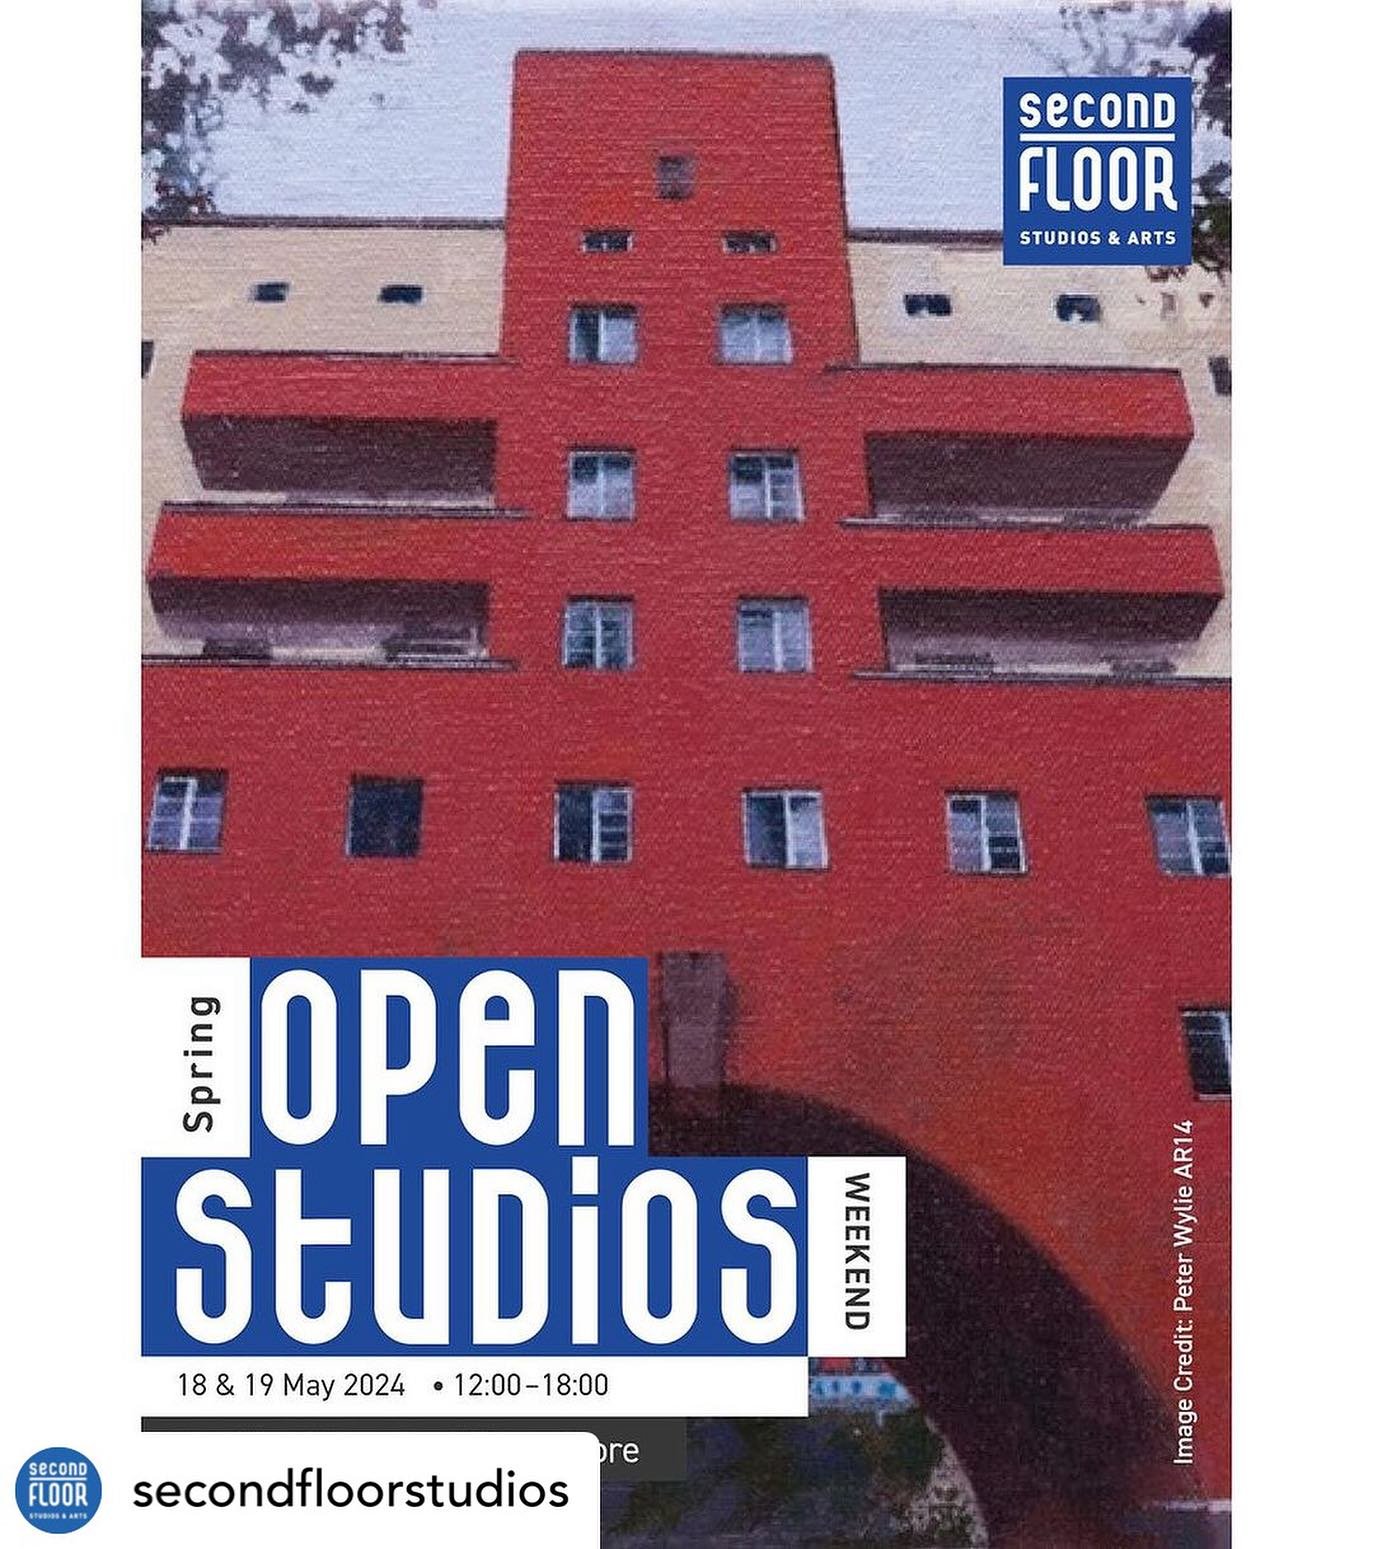 As well as our little 20 years shindig, open studios is happening once more @secondfloorstudios Deptford Foundry site where we reside on Saturday 18/Sunday 19th May! 

So as well as visiting us, you can have a nose in dozens of other studios of artis